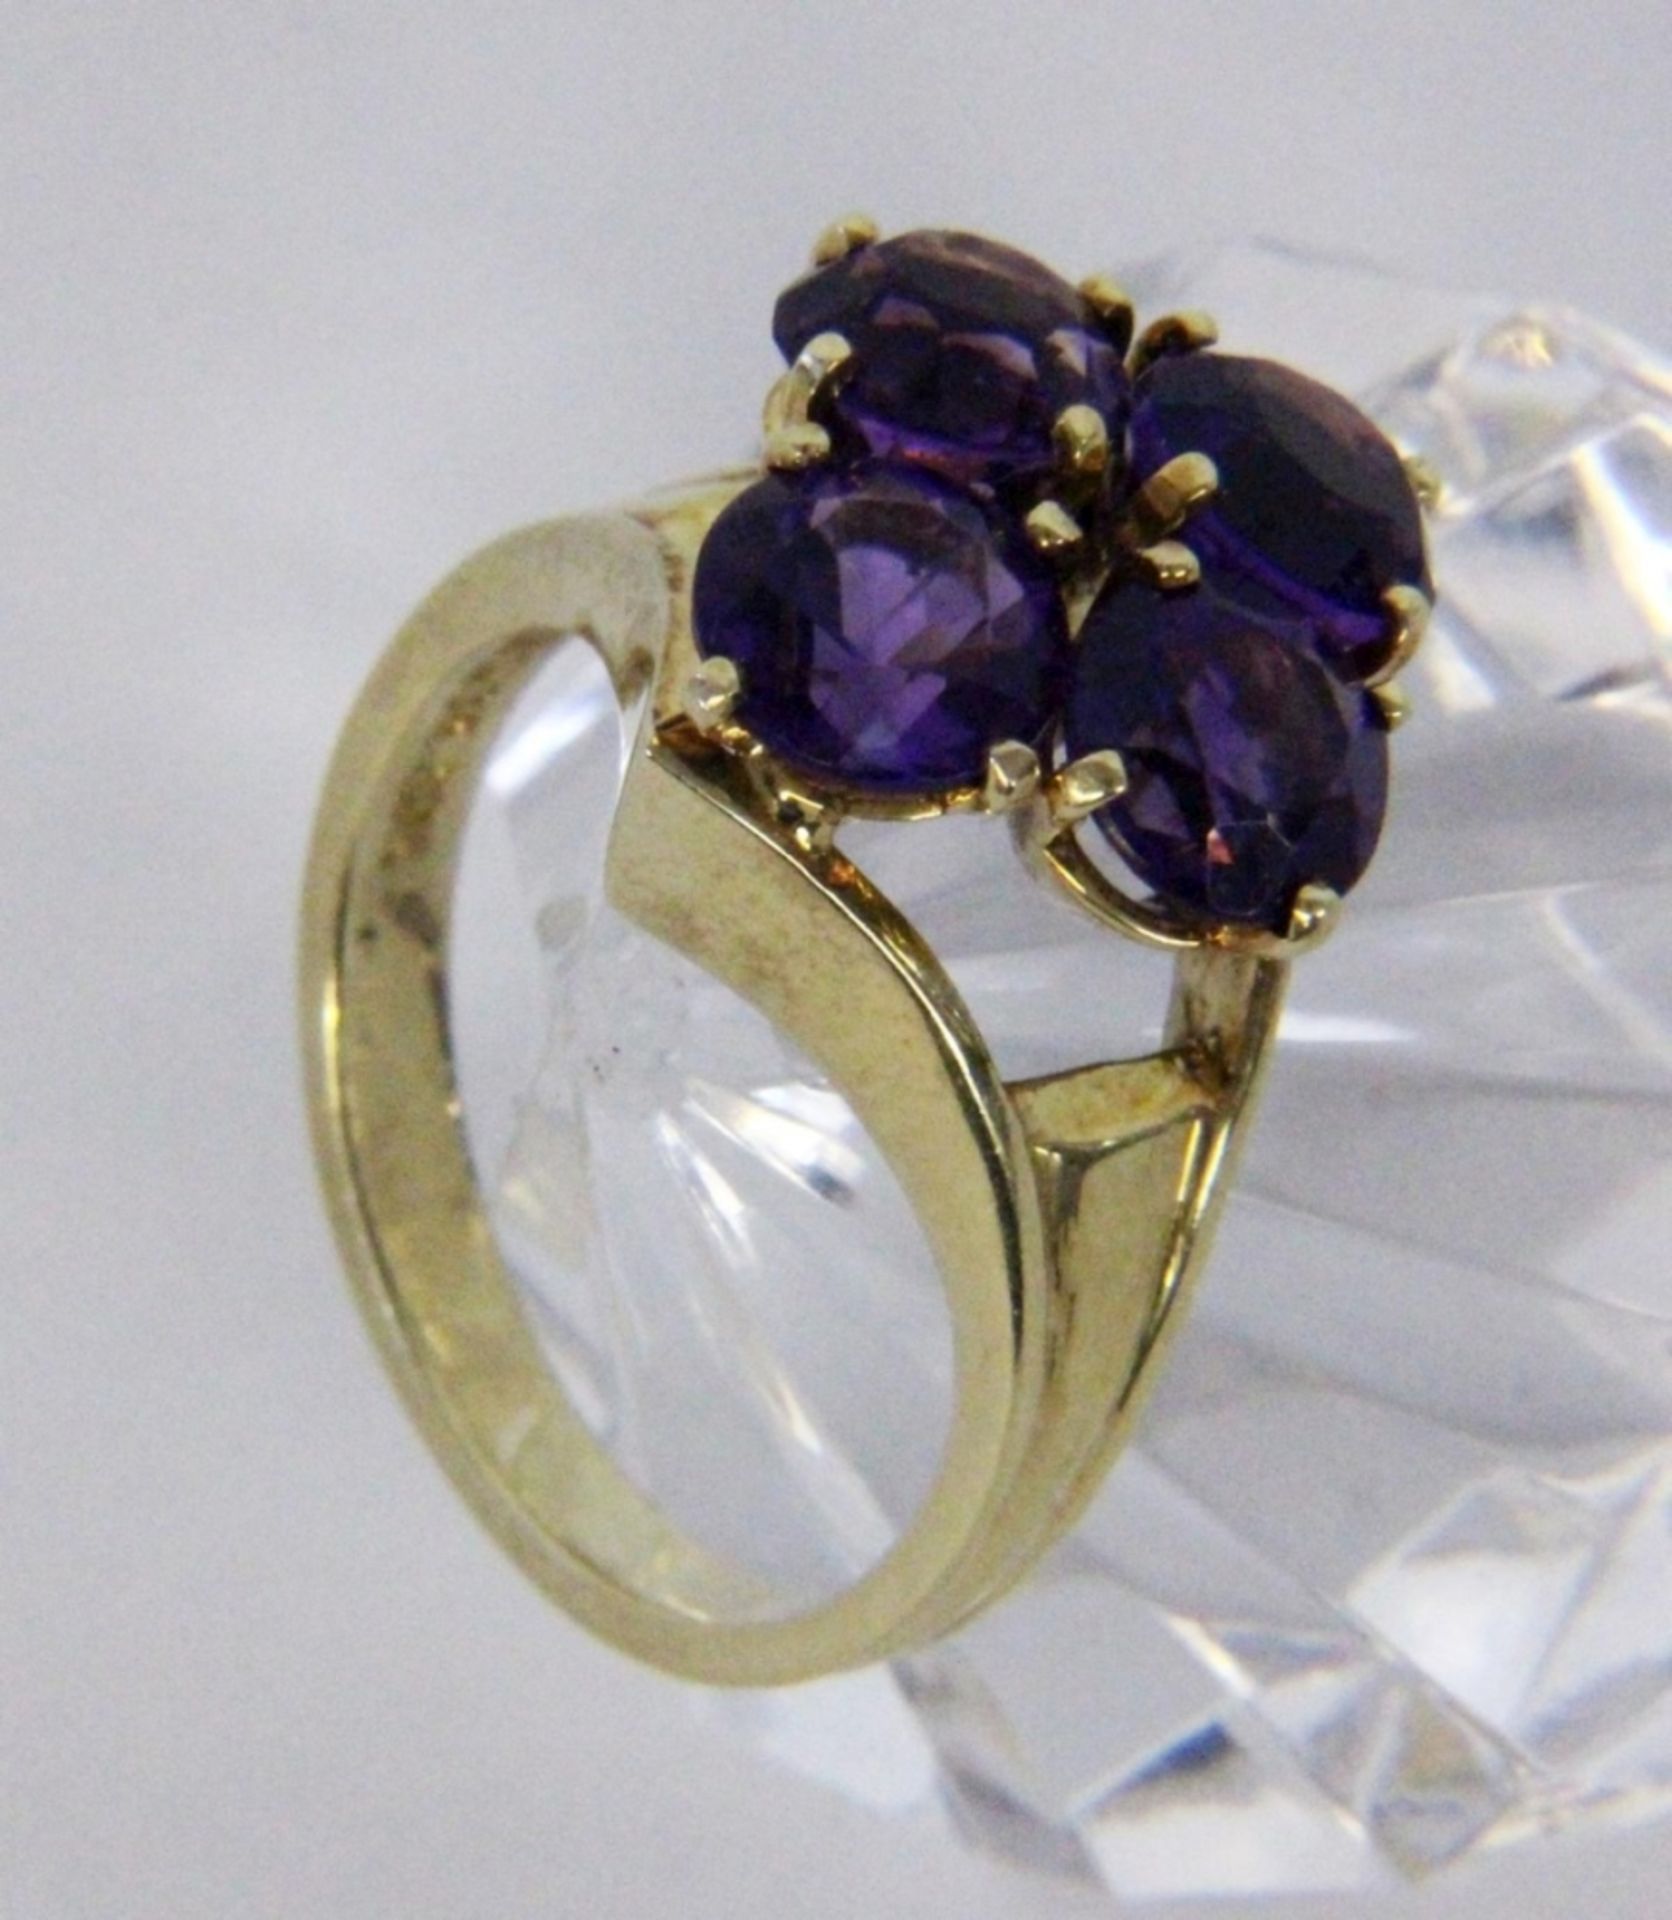 A LADIES RING 585/000 yellow gold with 4 amethysts. Ring size 54, gross weight